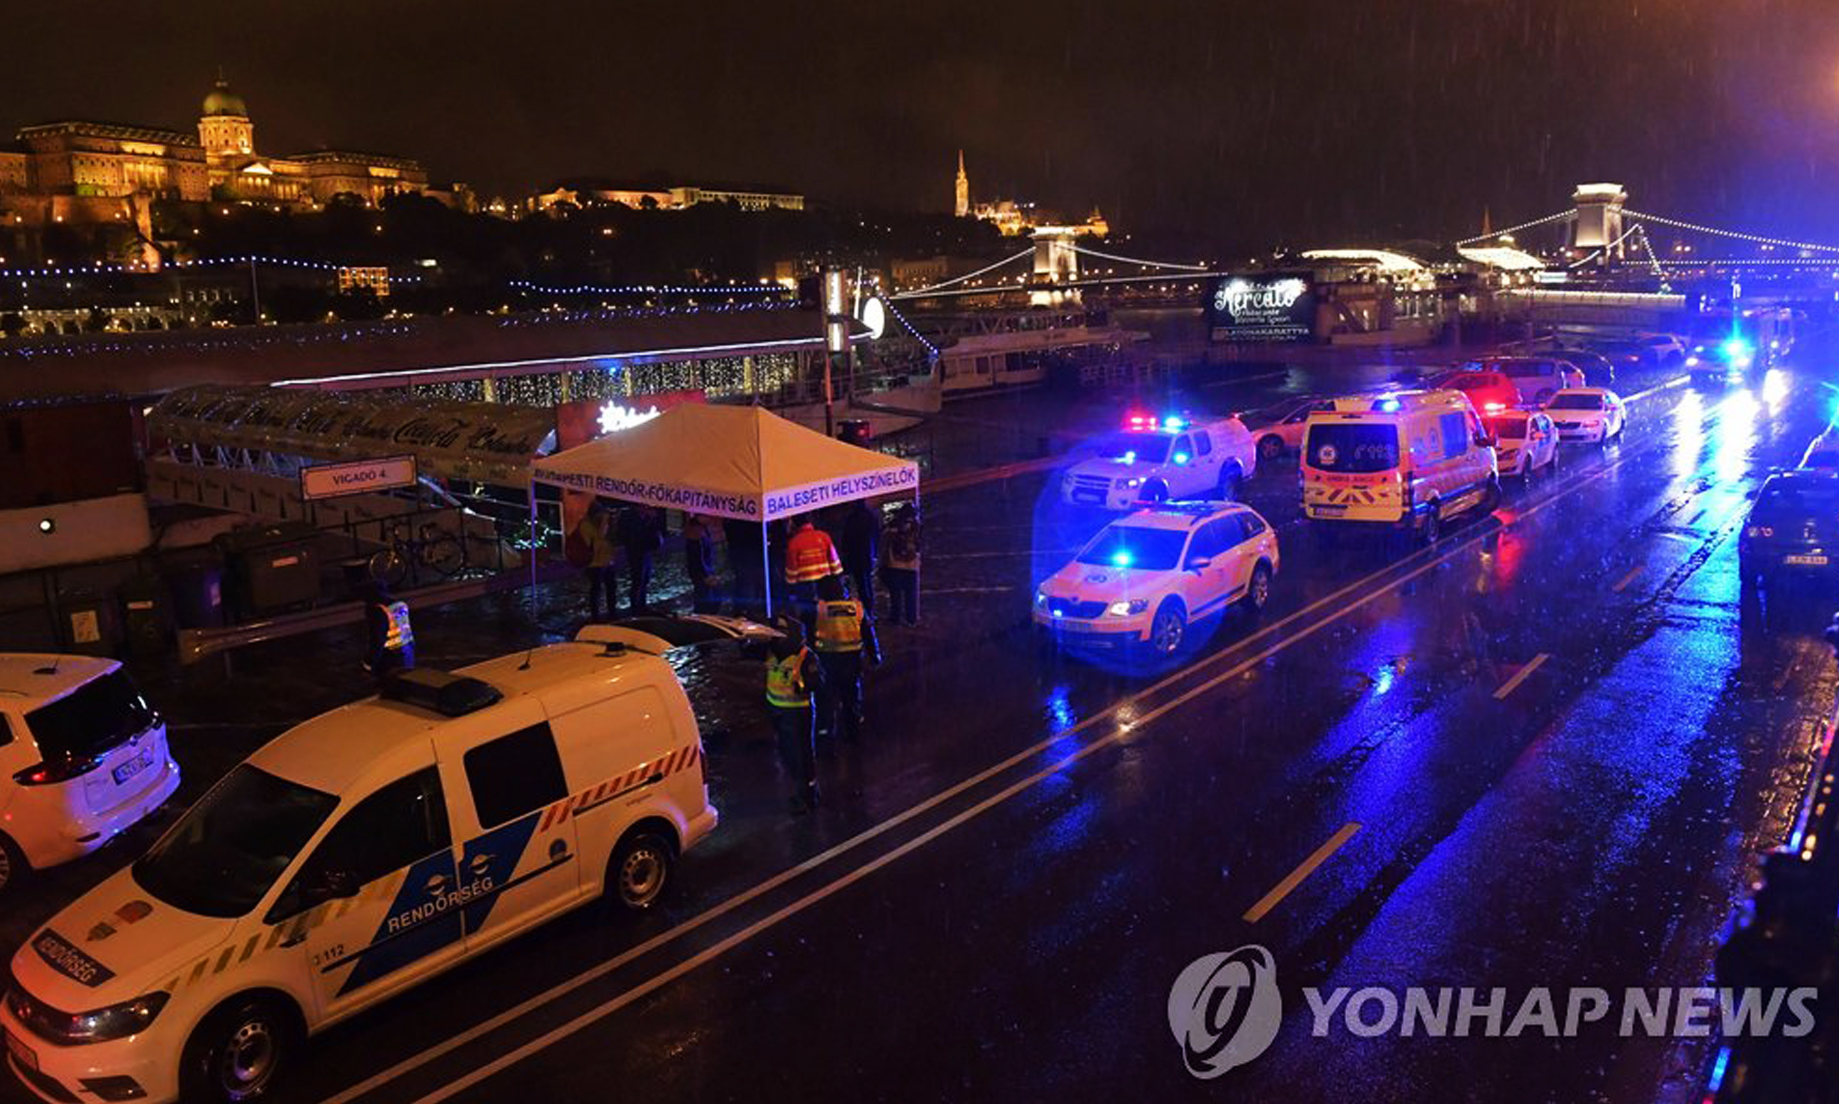 Hopes of finding missing South Koreans fade after Budapest boat tragedy